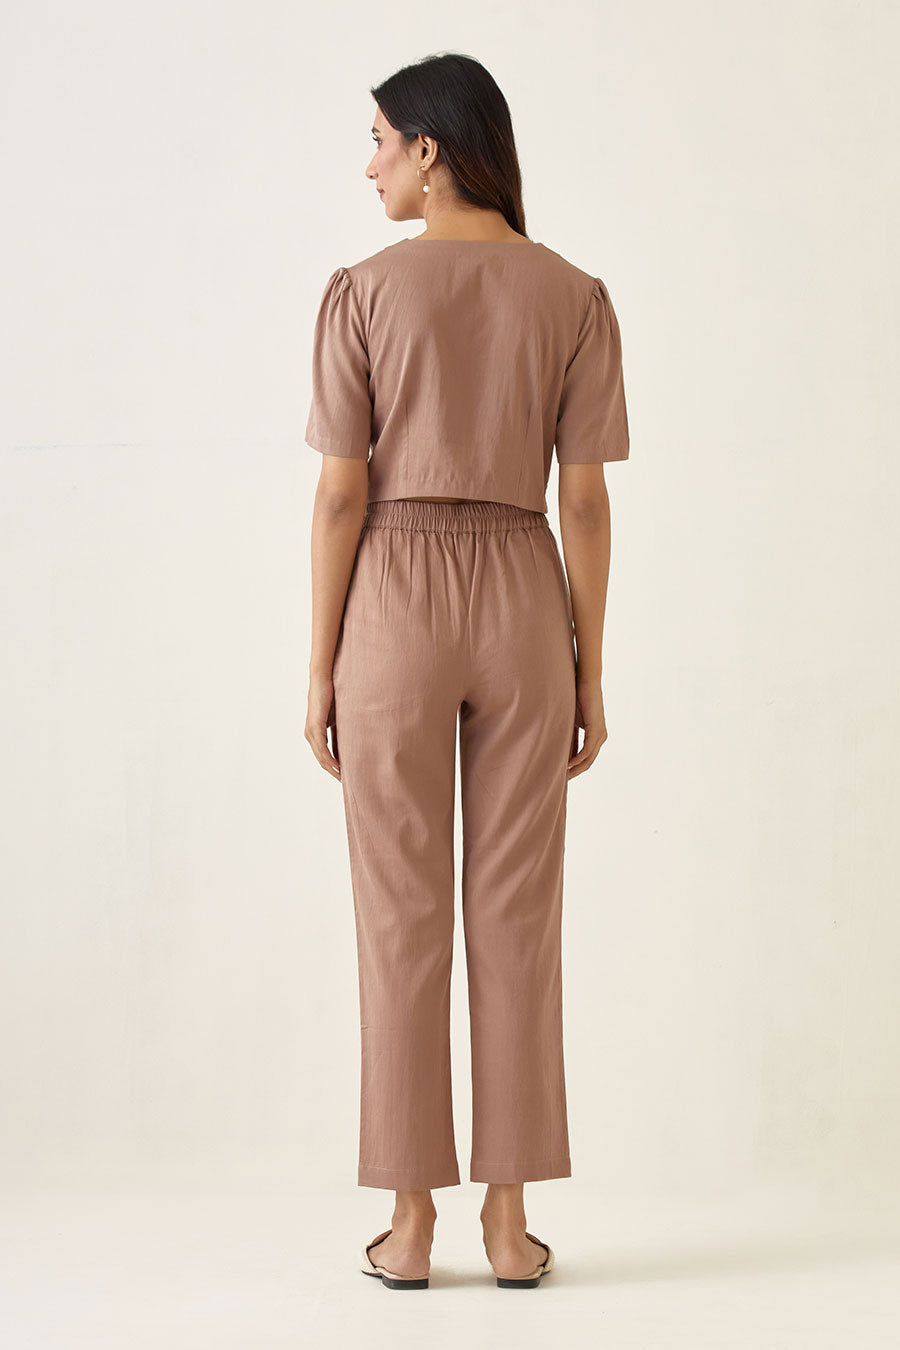 Taupe Crop Top with Pleated Pant Co-ord Set